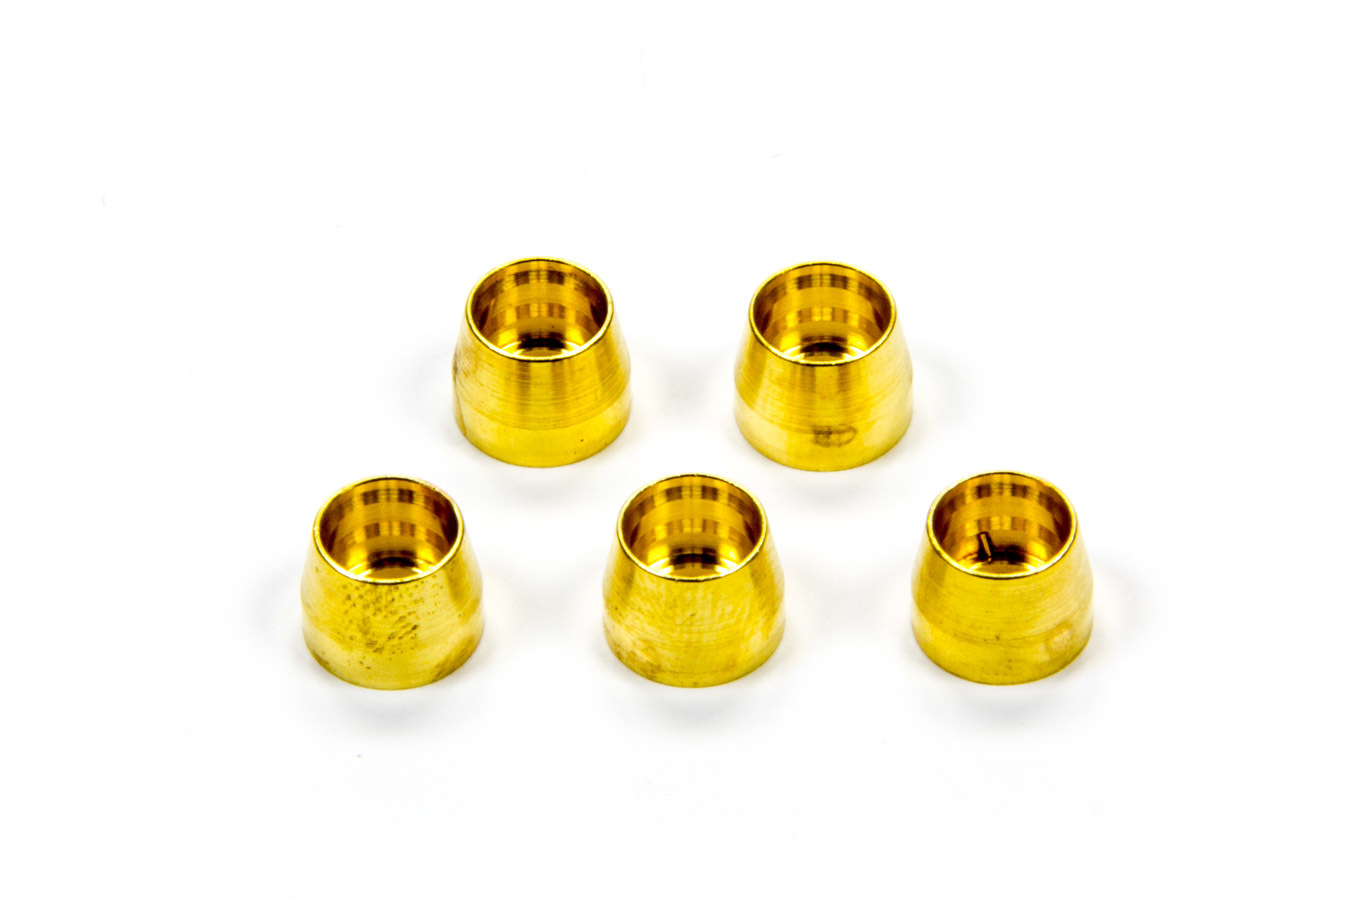 Aeroquip FCM3721 Compression Ferrule, 4 AN, Brass, PTFE Fittings, Set of 5